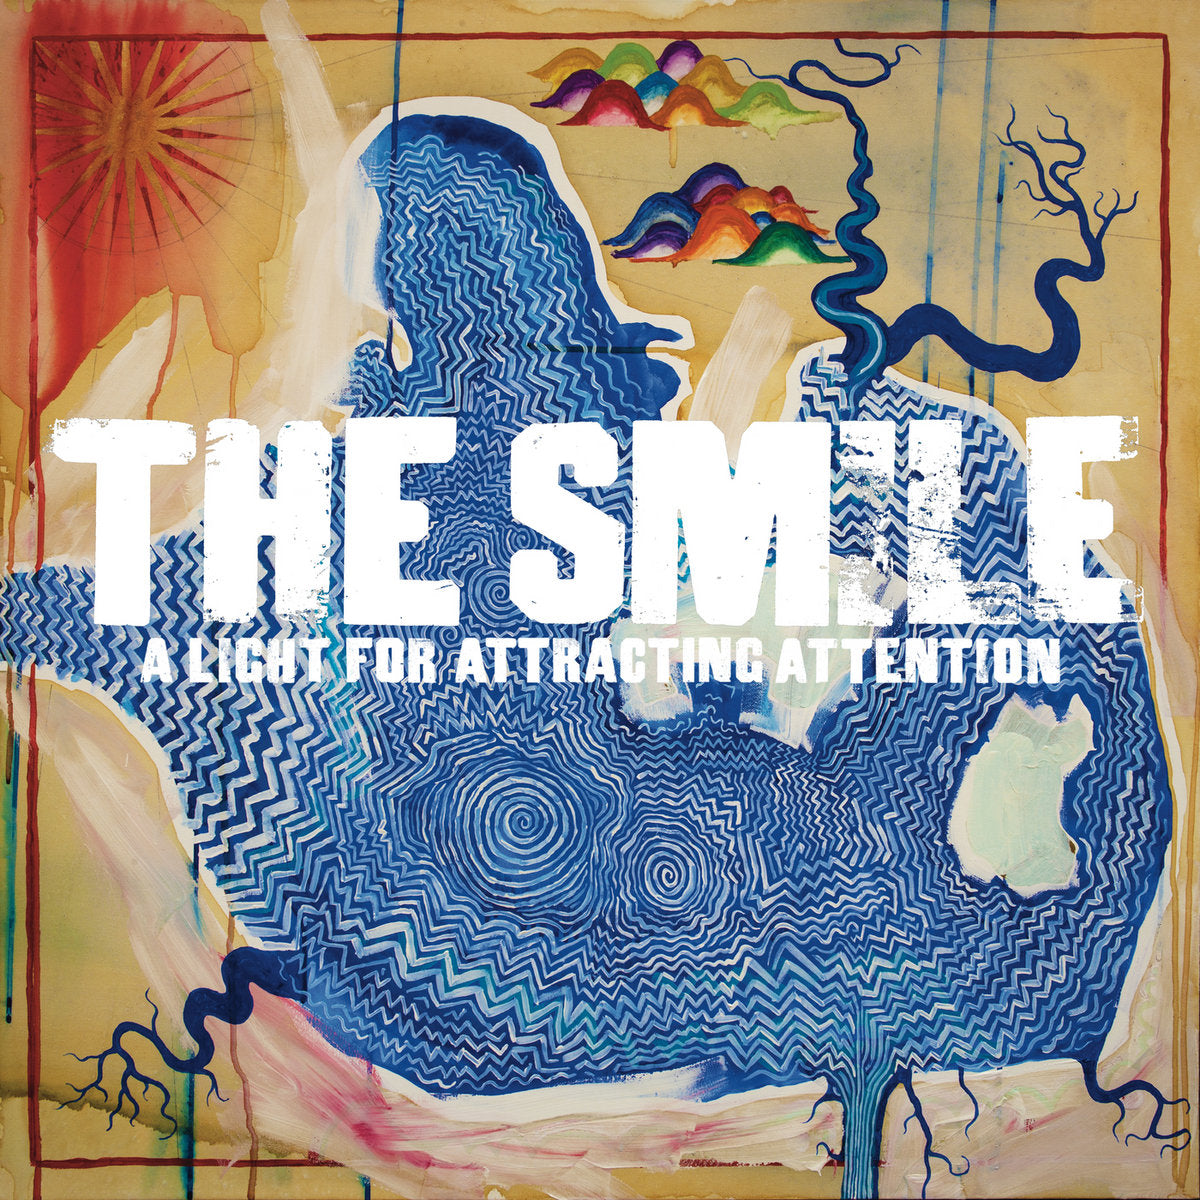 CD - The Smile - A Light For Attracting Attention